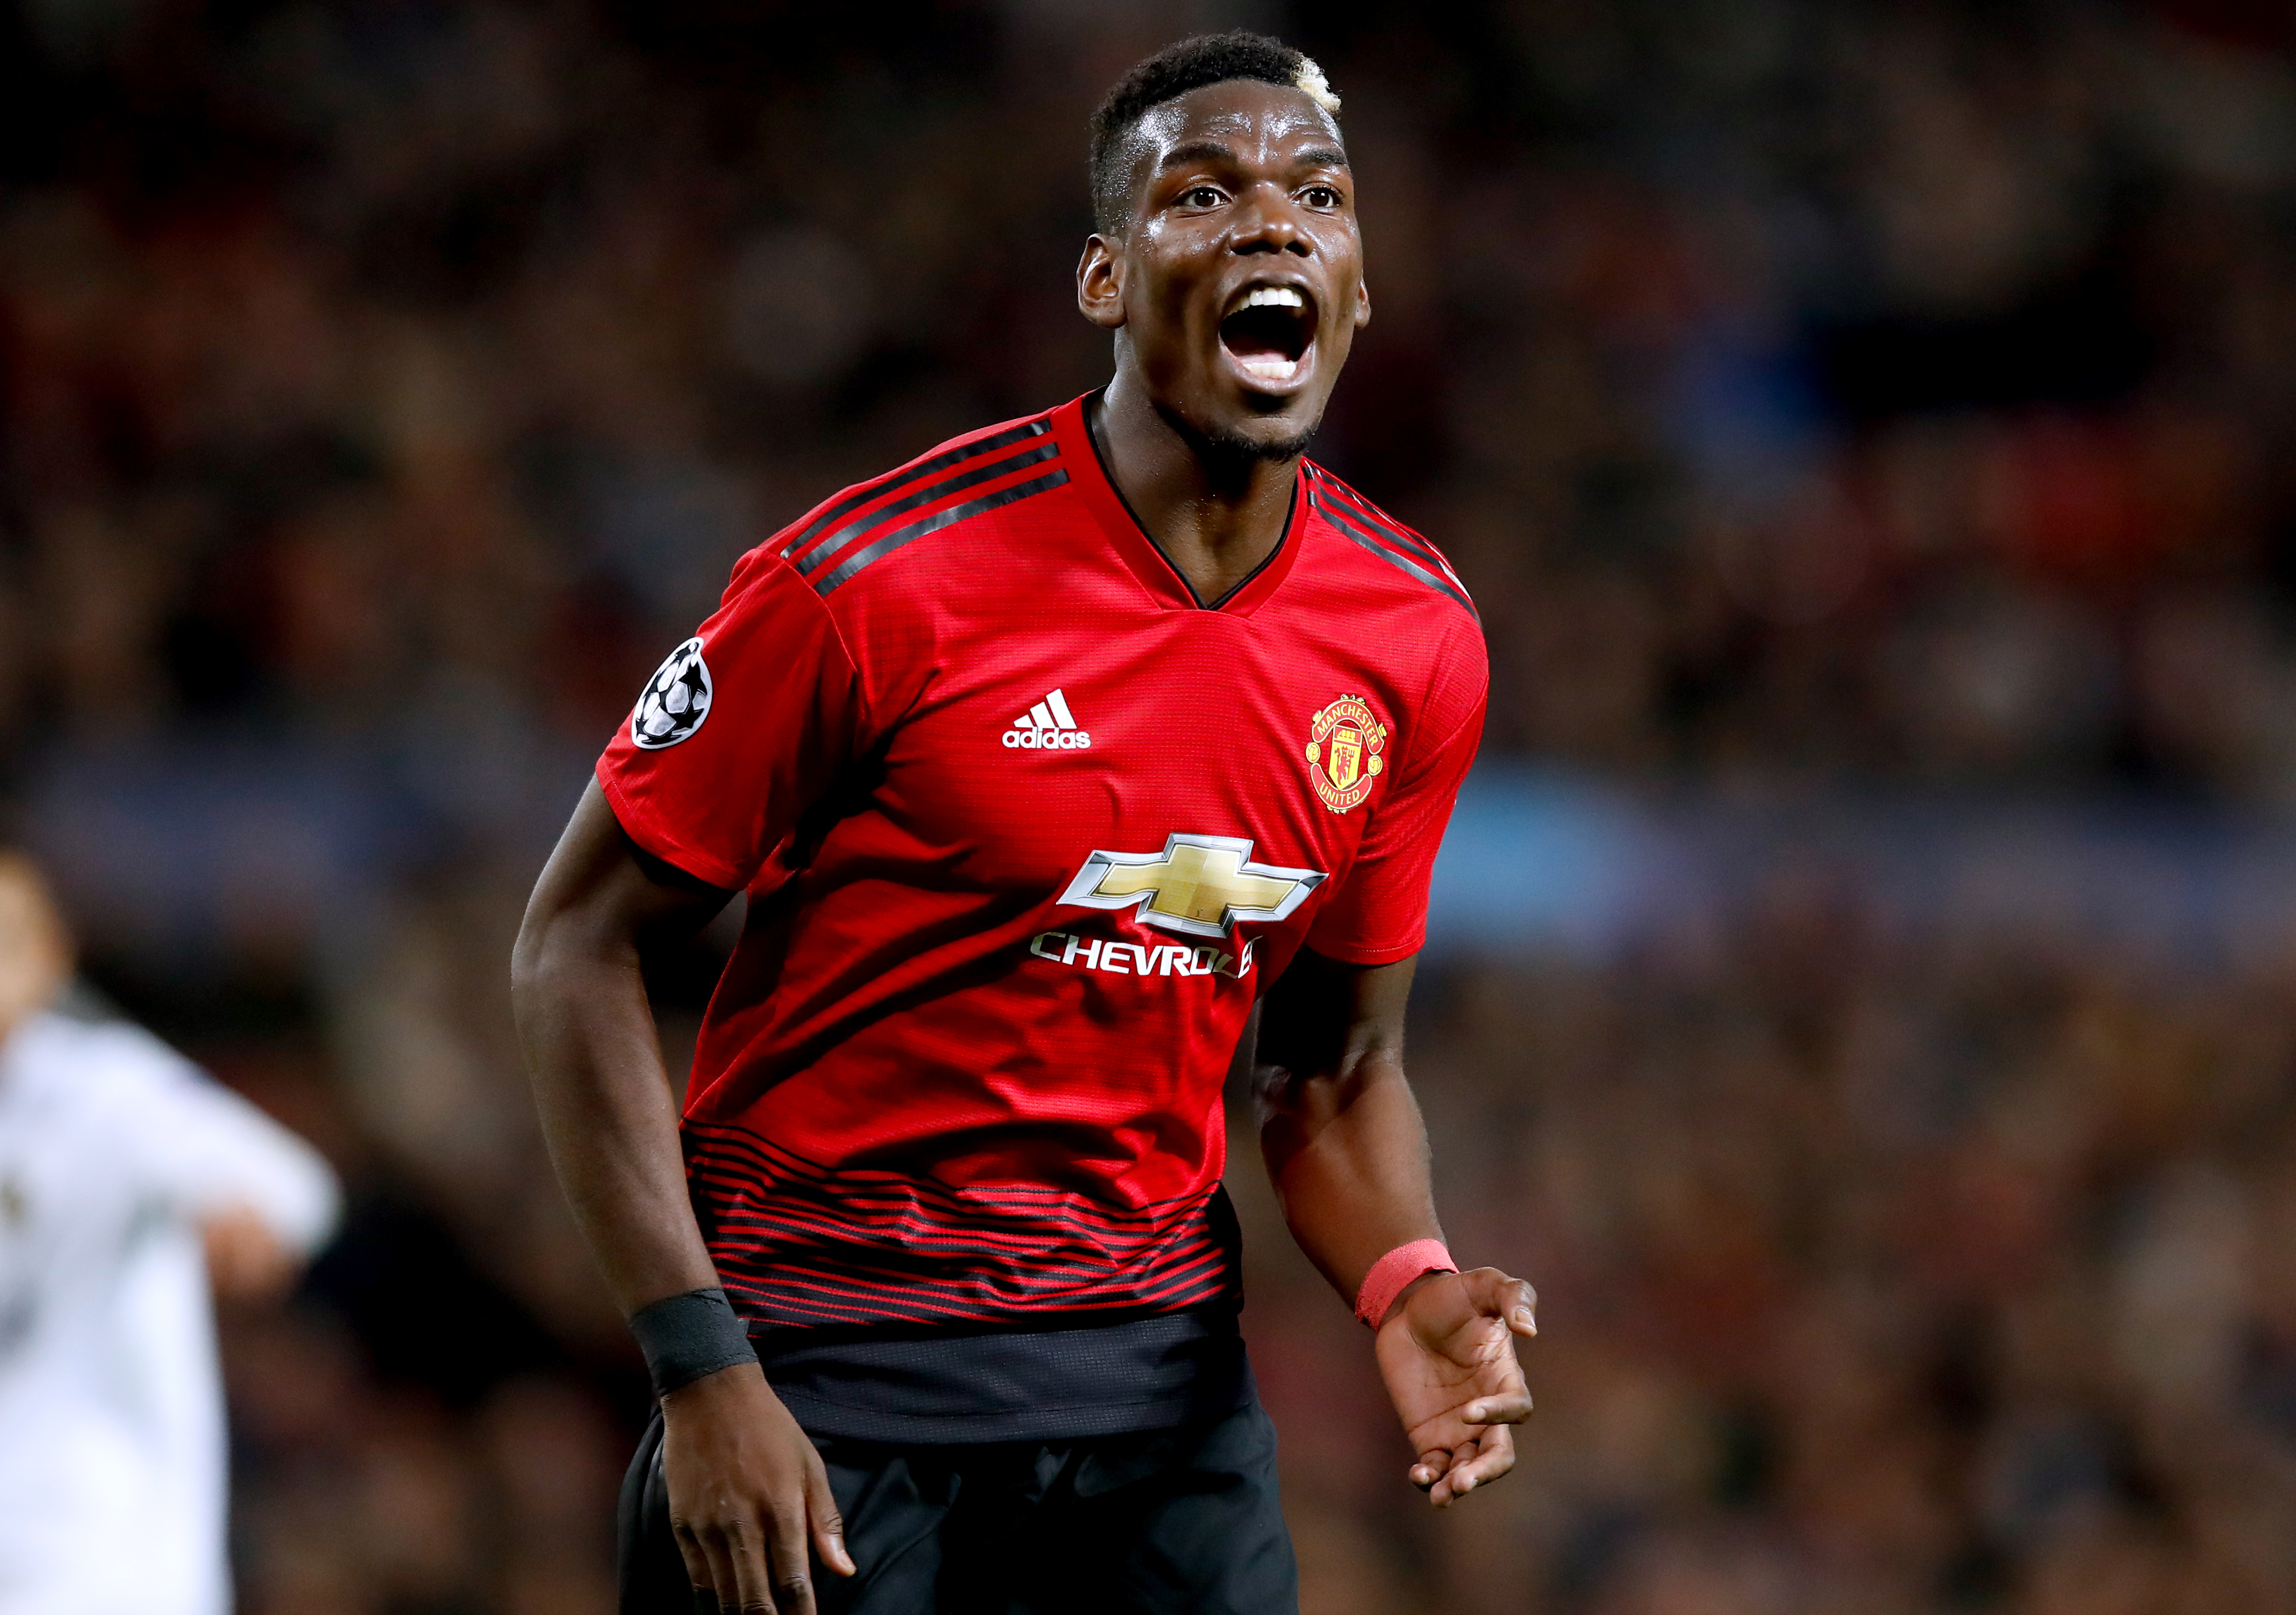 Manchester United's Paul Pogba during the UEFA Champions League, Group H match at Old Trafford, Manchester.